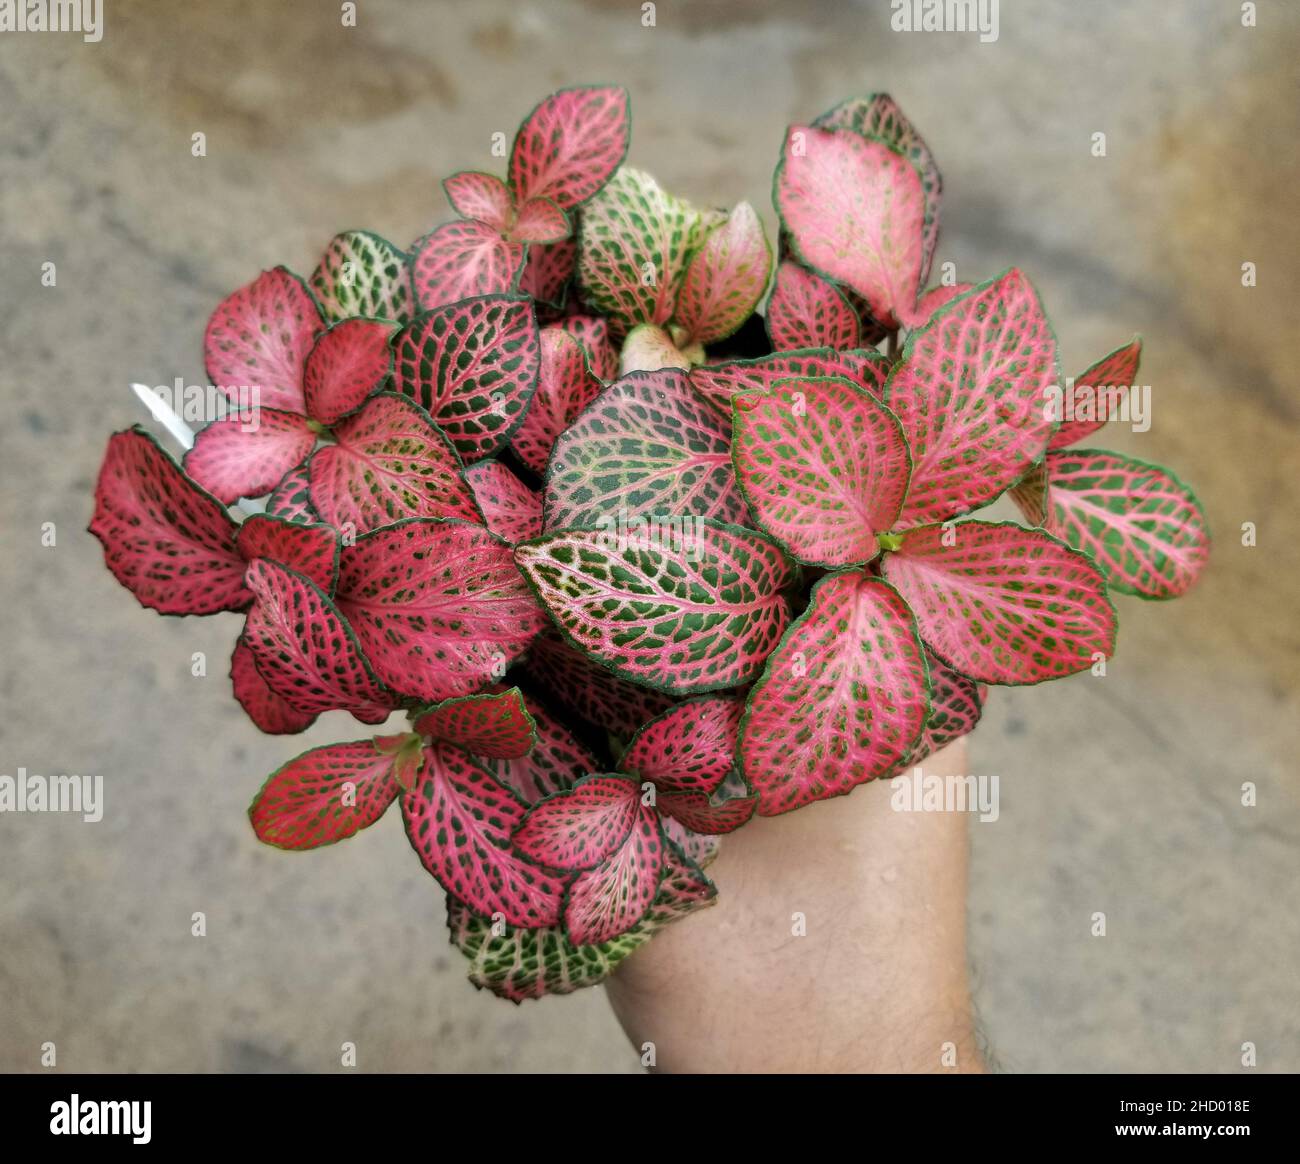 Fittonia Red, a tropical plants for a glass terrarium Stock Photo